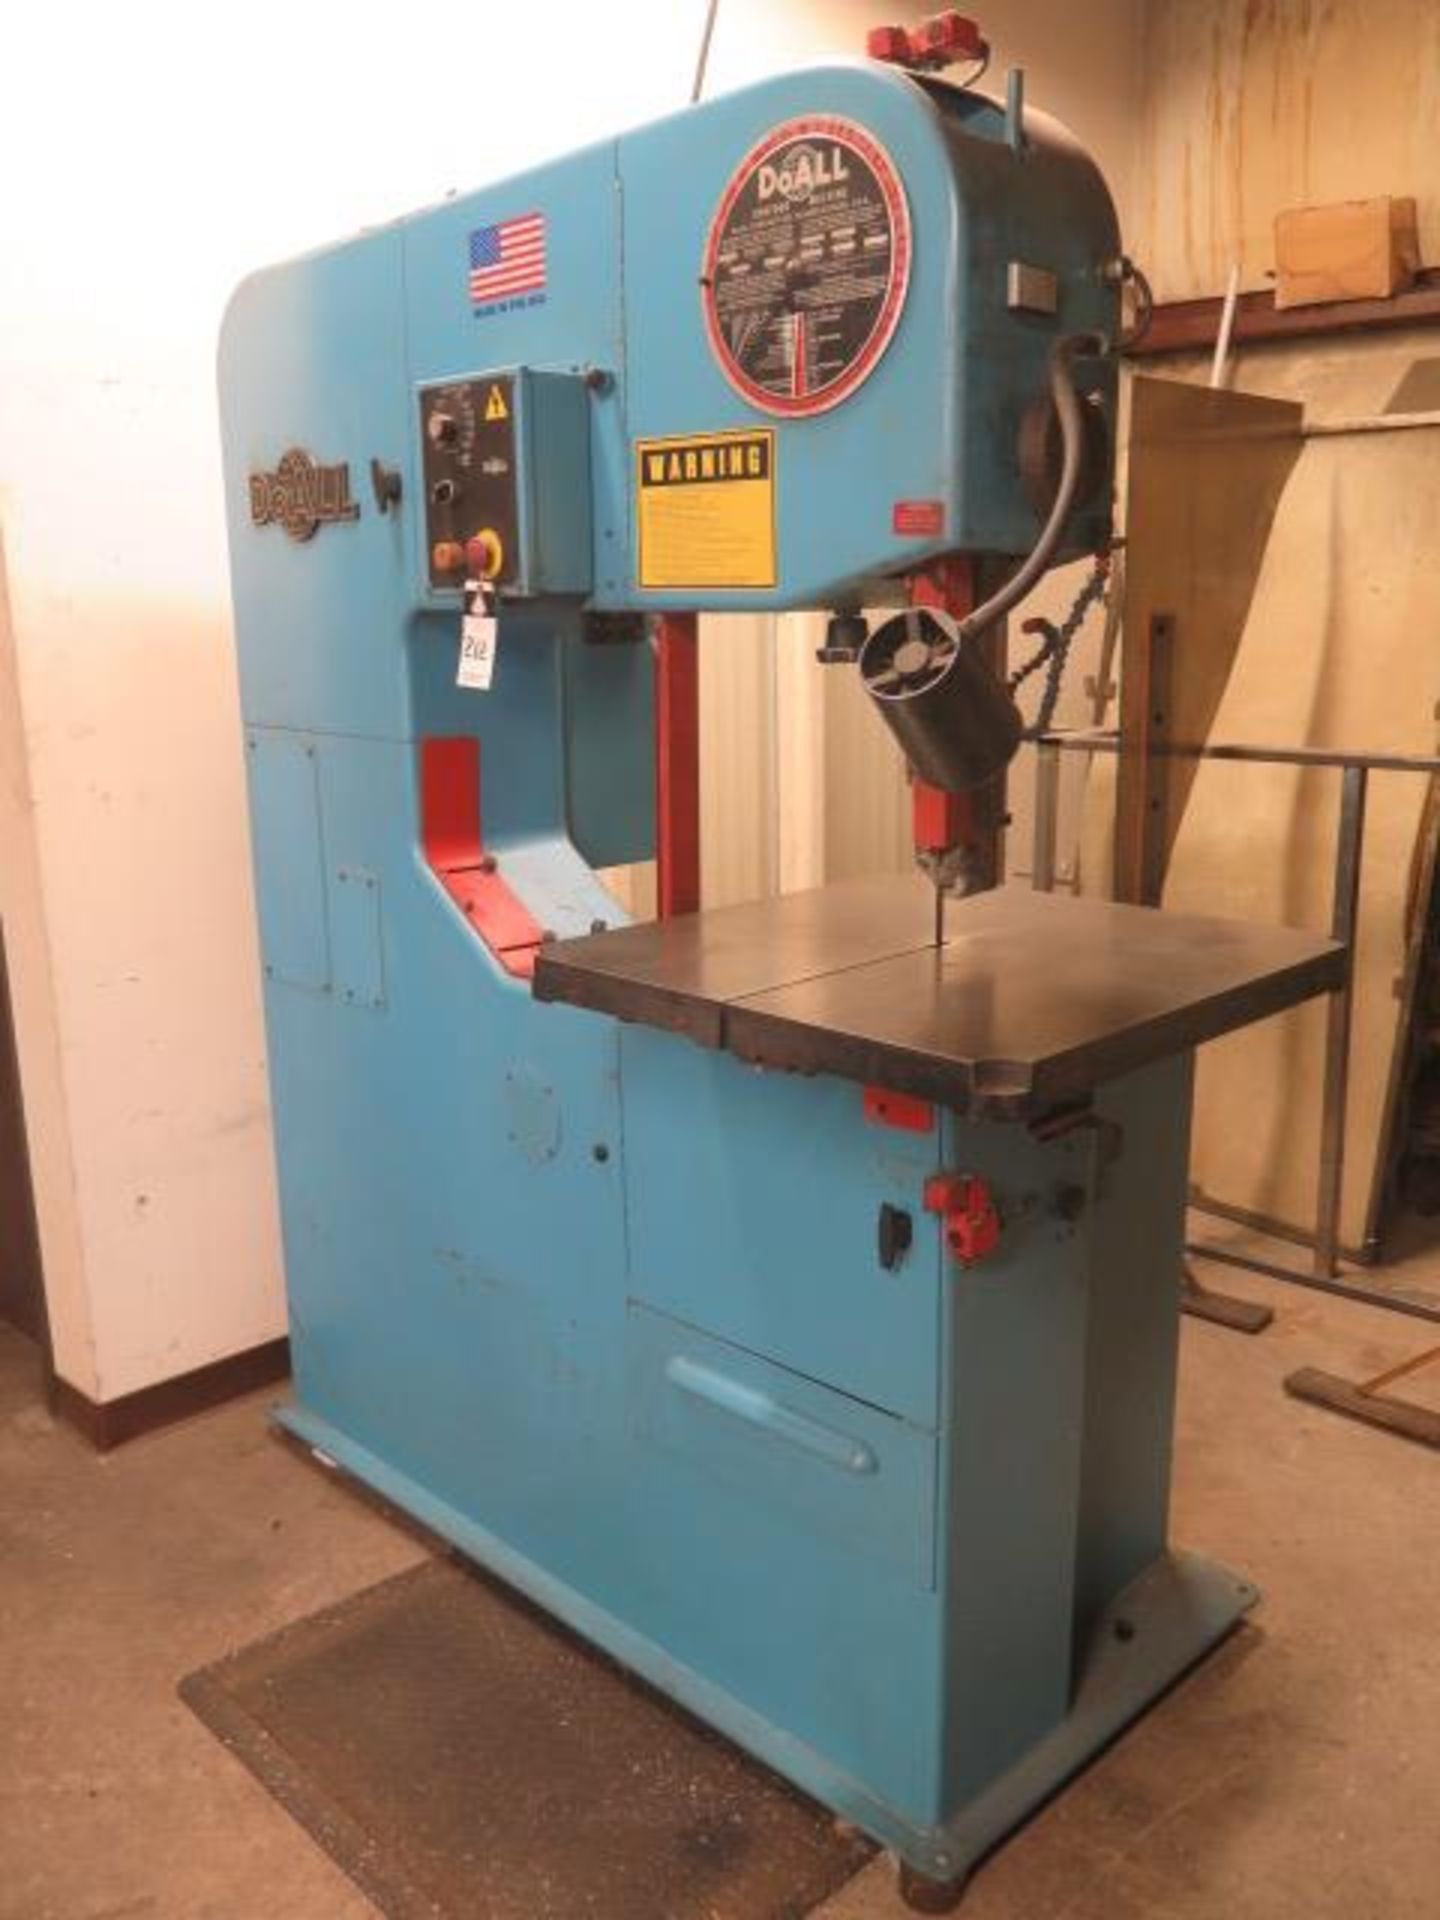 DoAll 3613-V3 36”/16” Vertical Band Saw s/n 538-98119 w/ 30-5500 Dial FPM, 26” x 26” Table